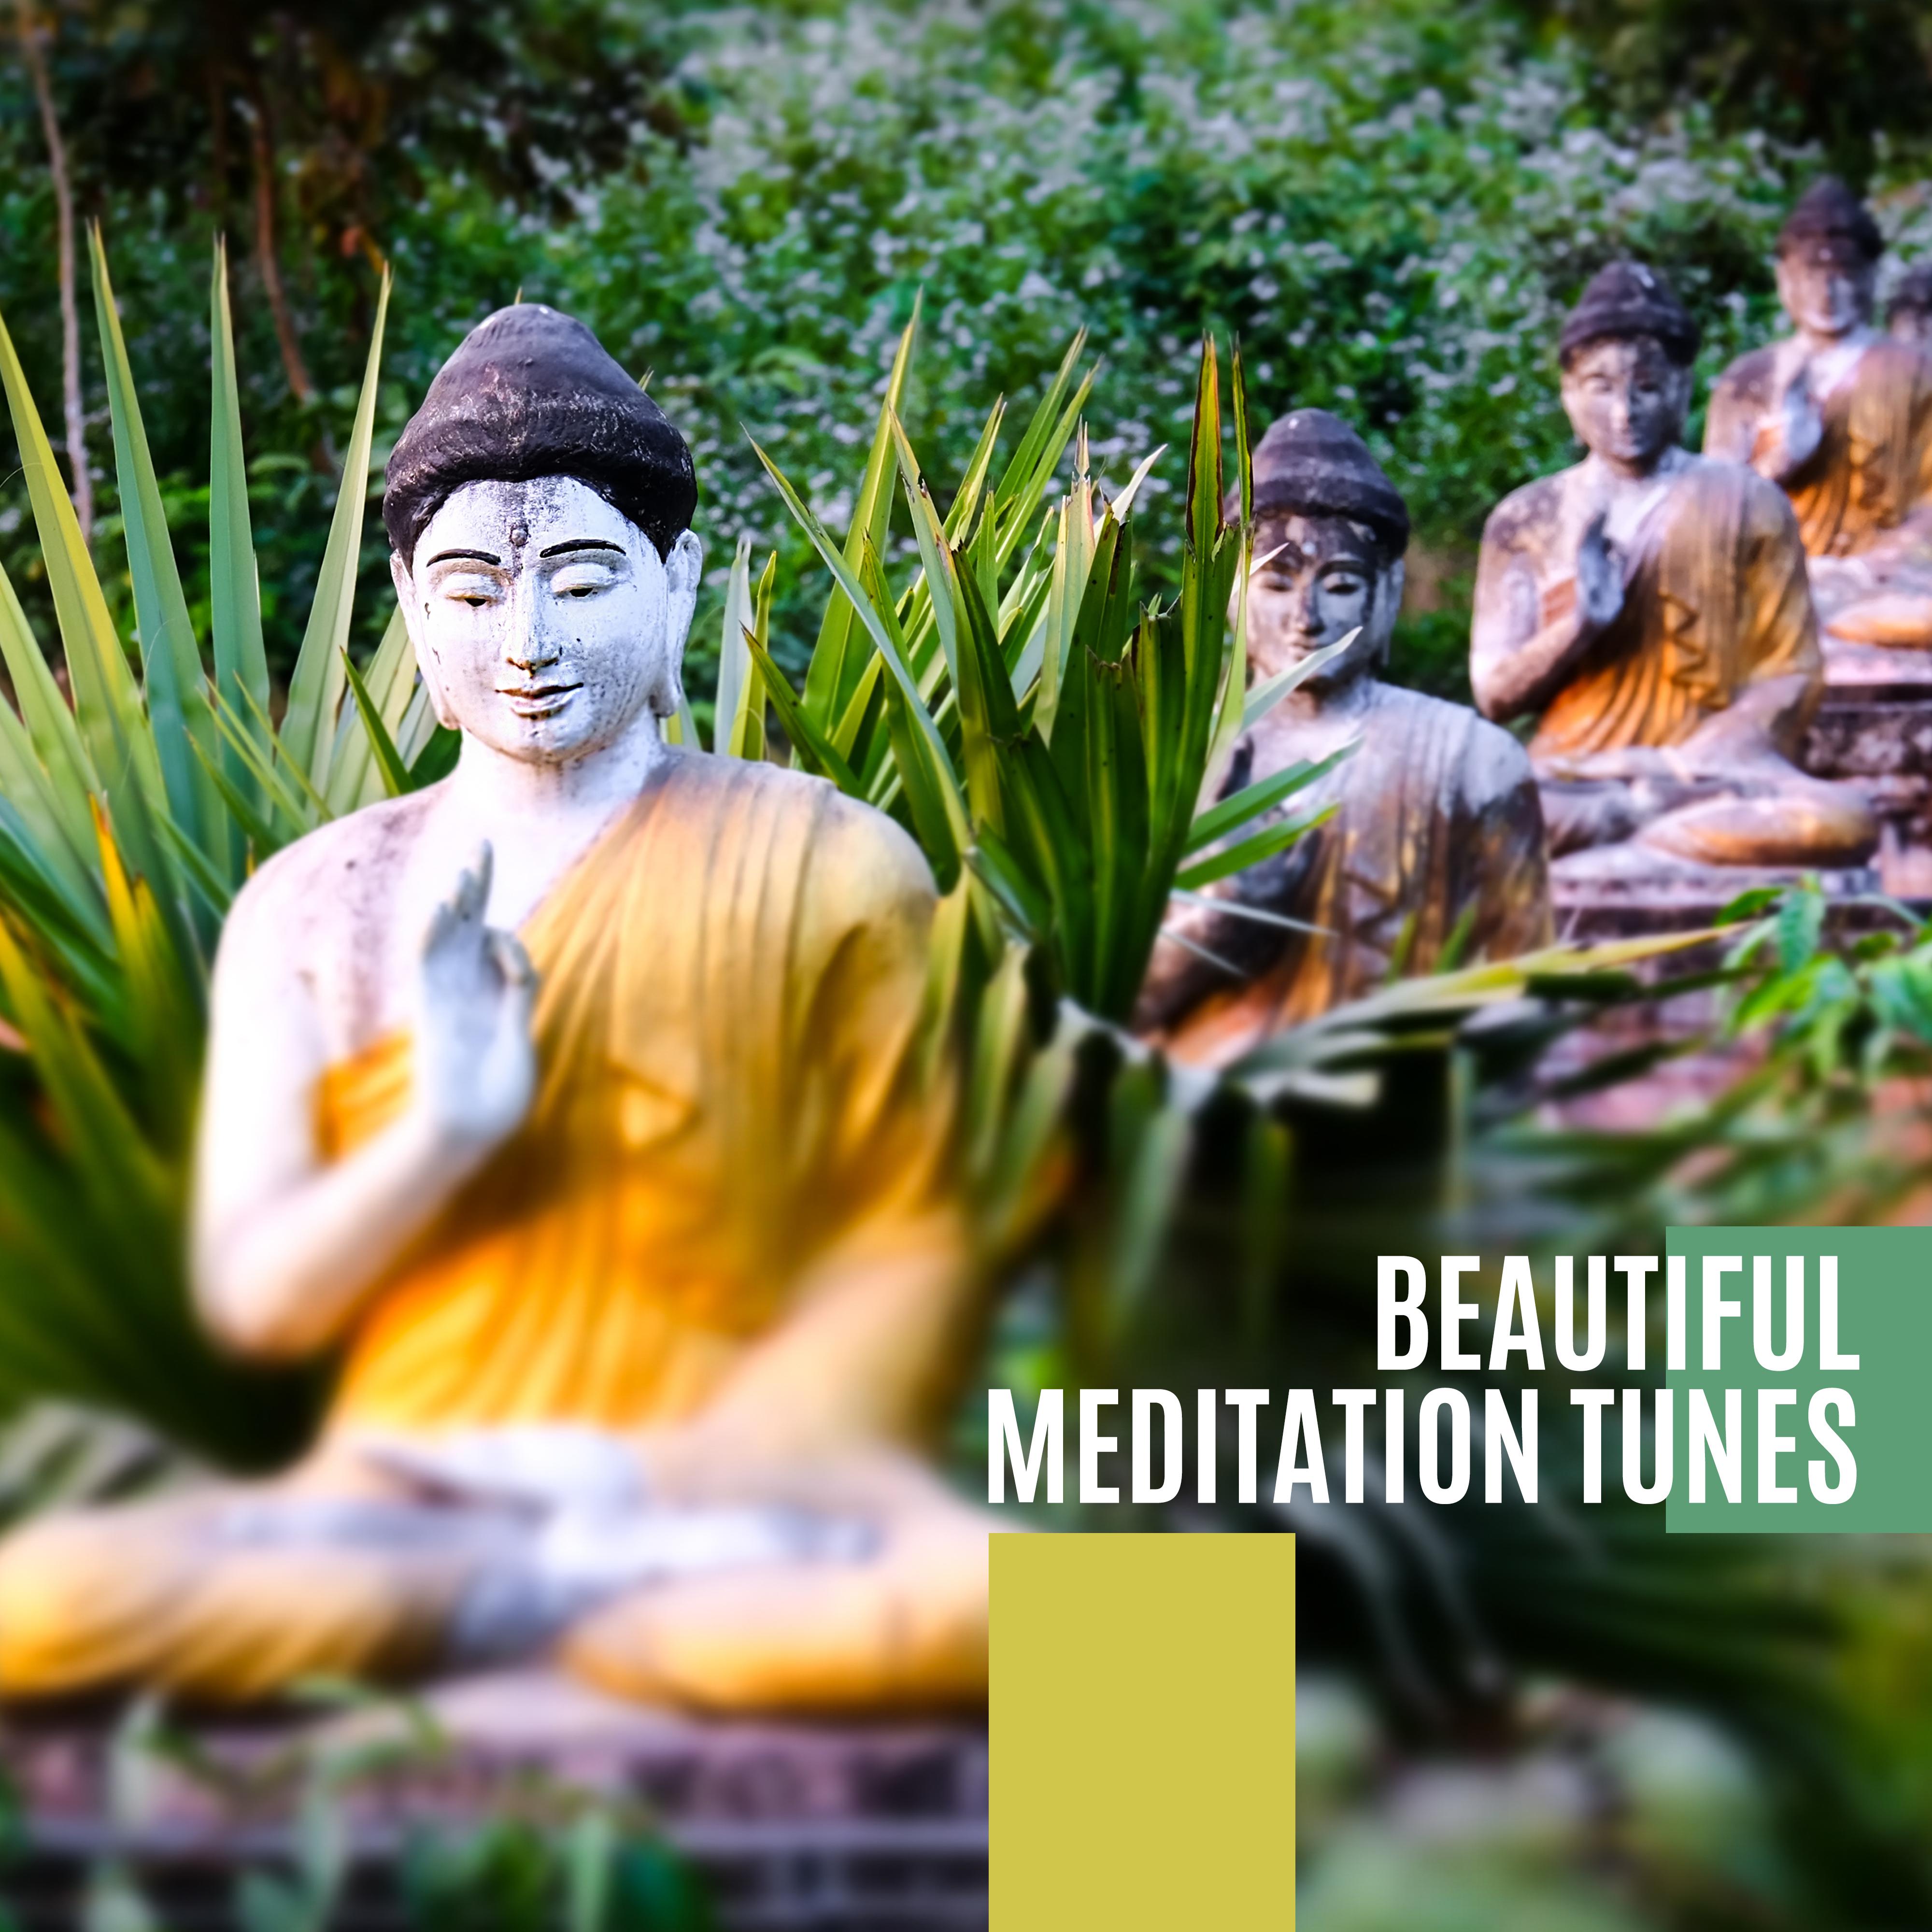 Beautiful Meditation Tunes: Gentle Melodies for Meditation, Subtle Music for Contemplation, Quiet Tunes for Relaxation and Rest